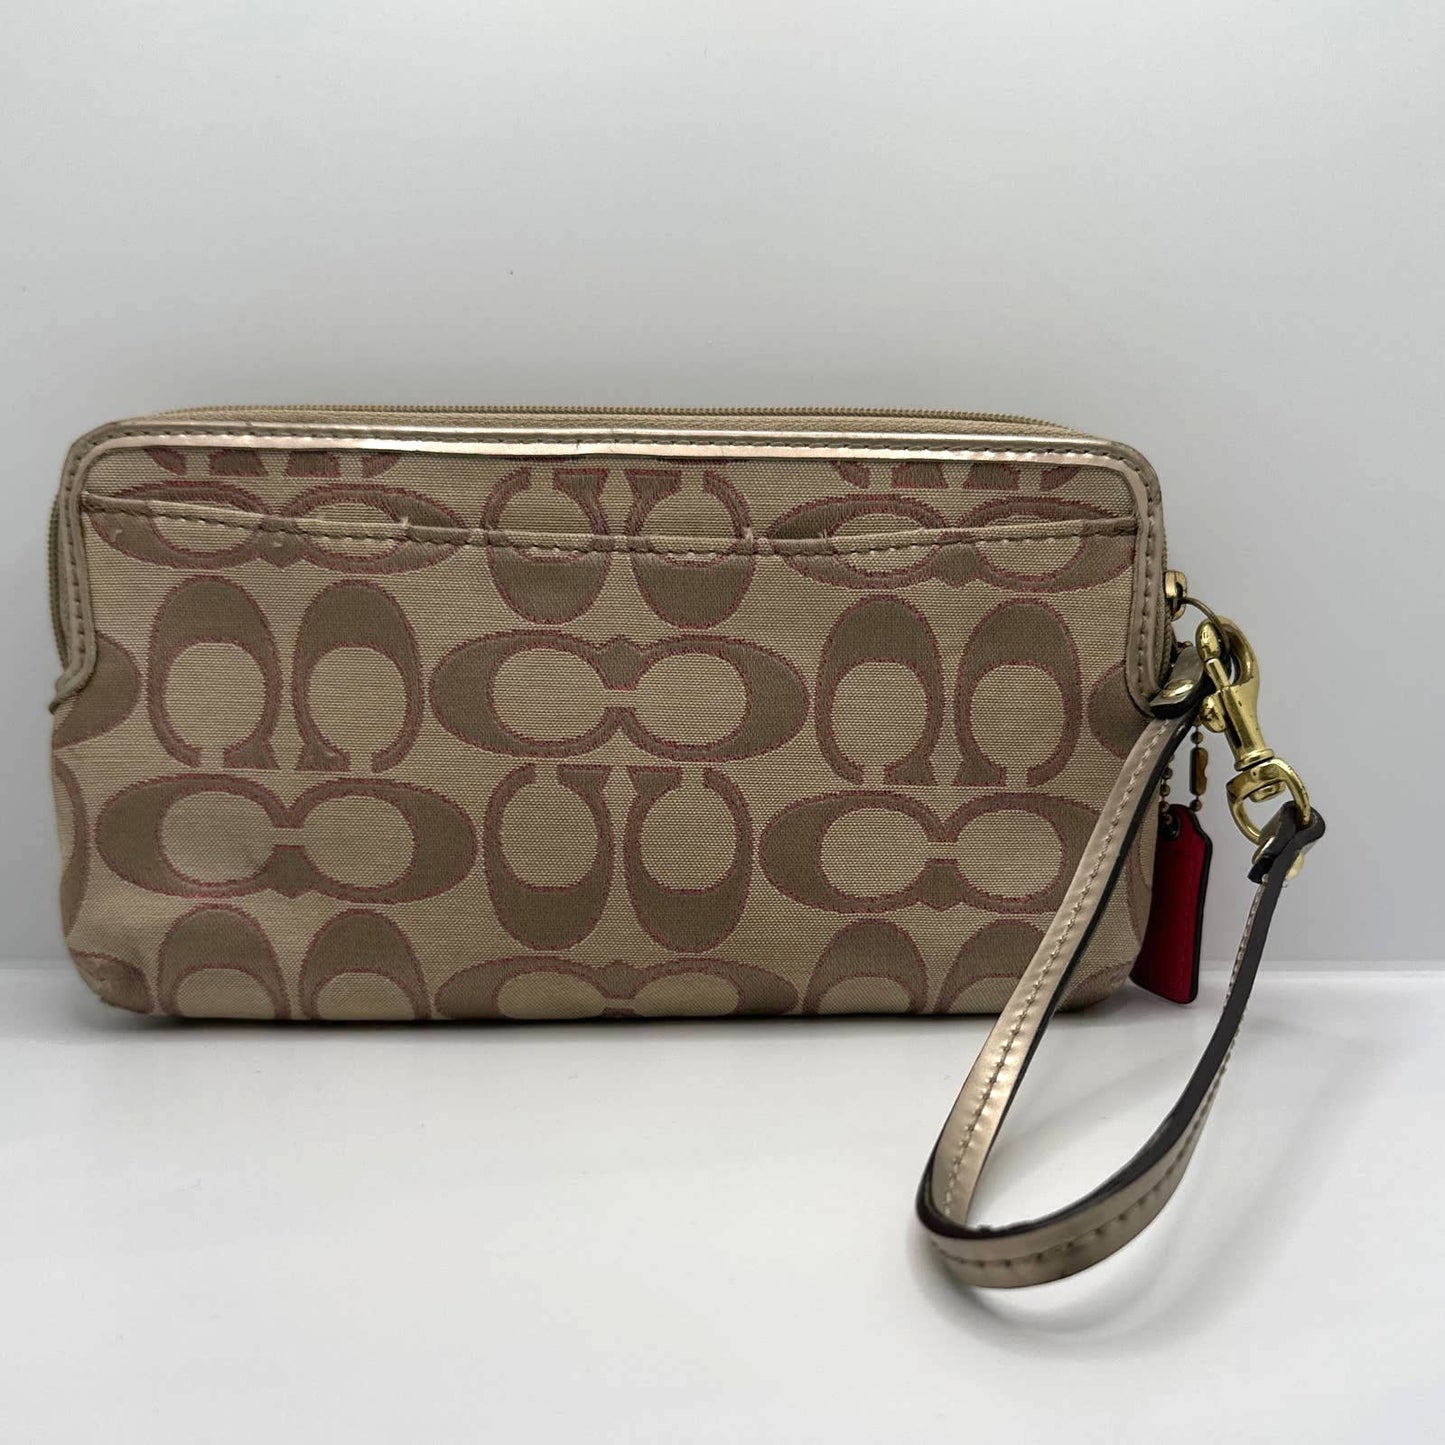 COACH Gold, Tan, and Pink Signature Canvas Wristlet